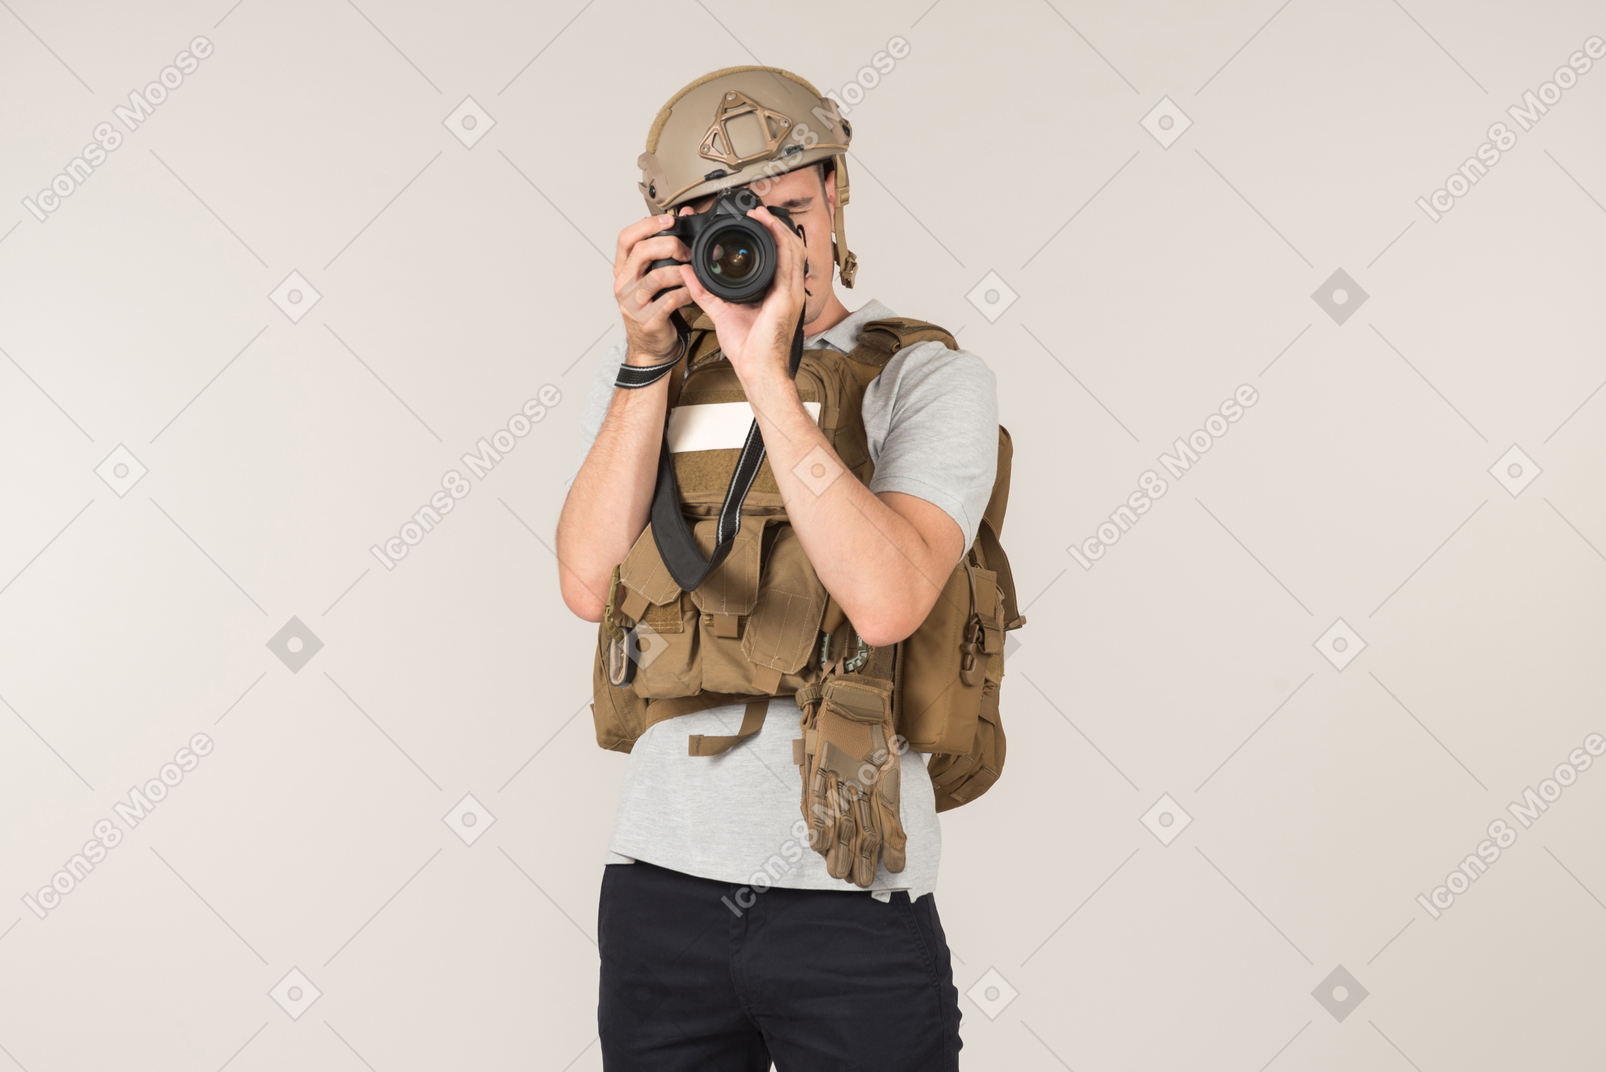 Male hot zone journalist making a photo with photo camera